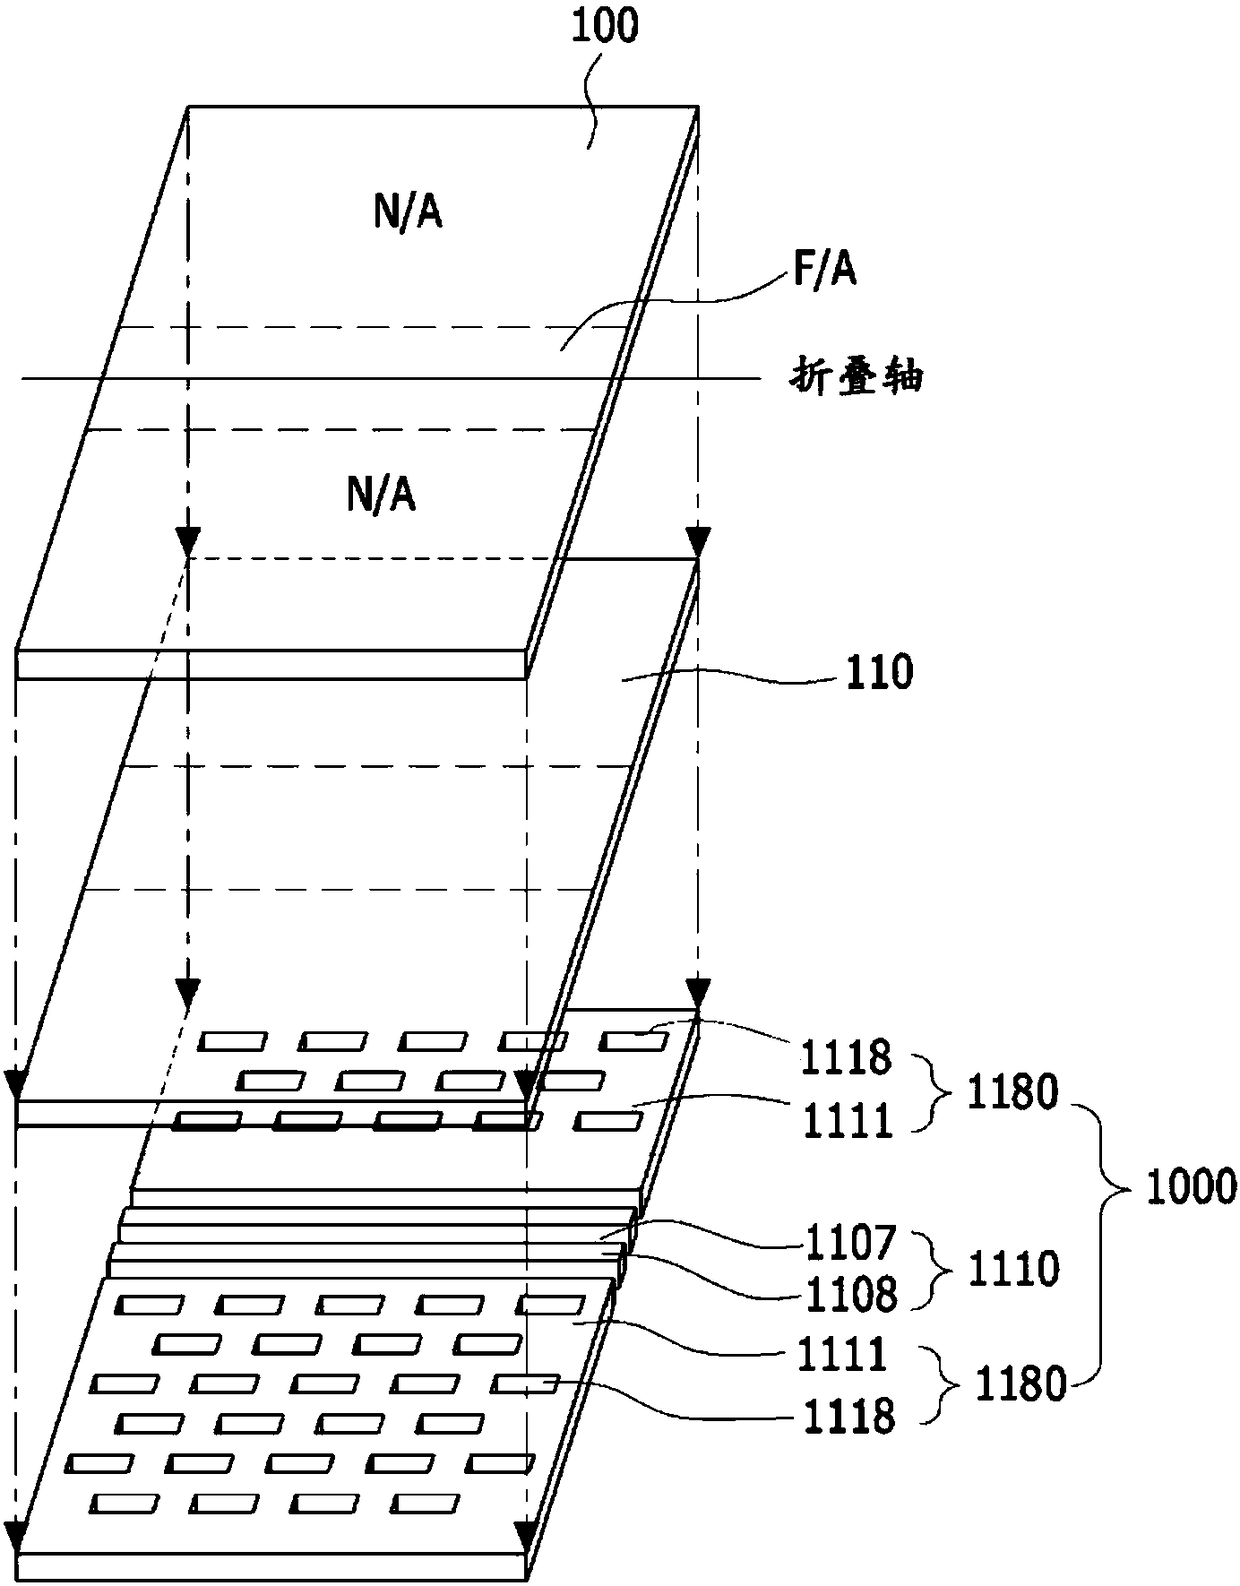 Foldable display device